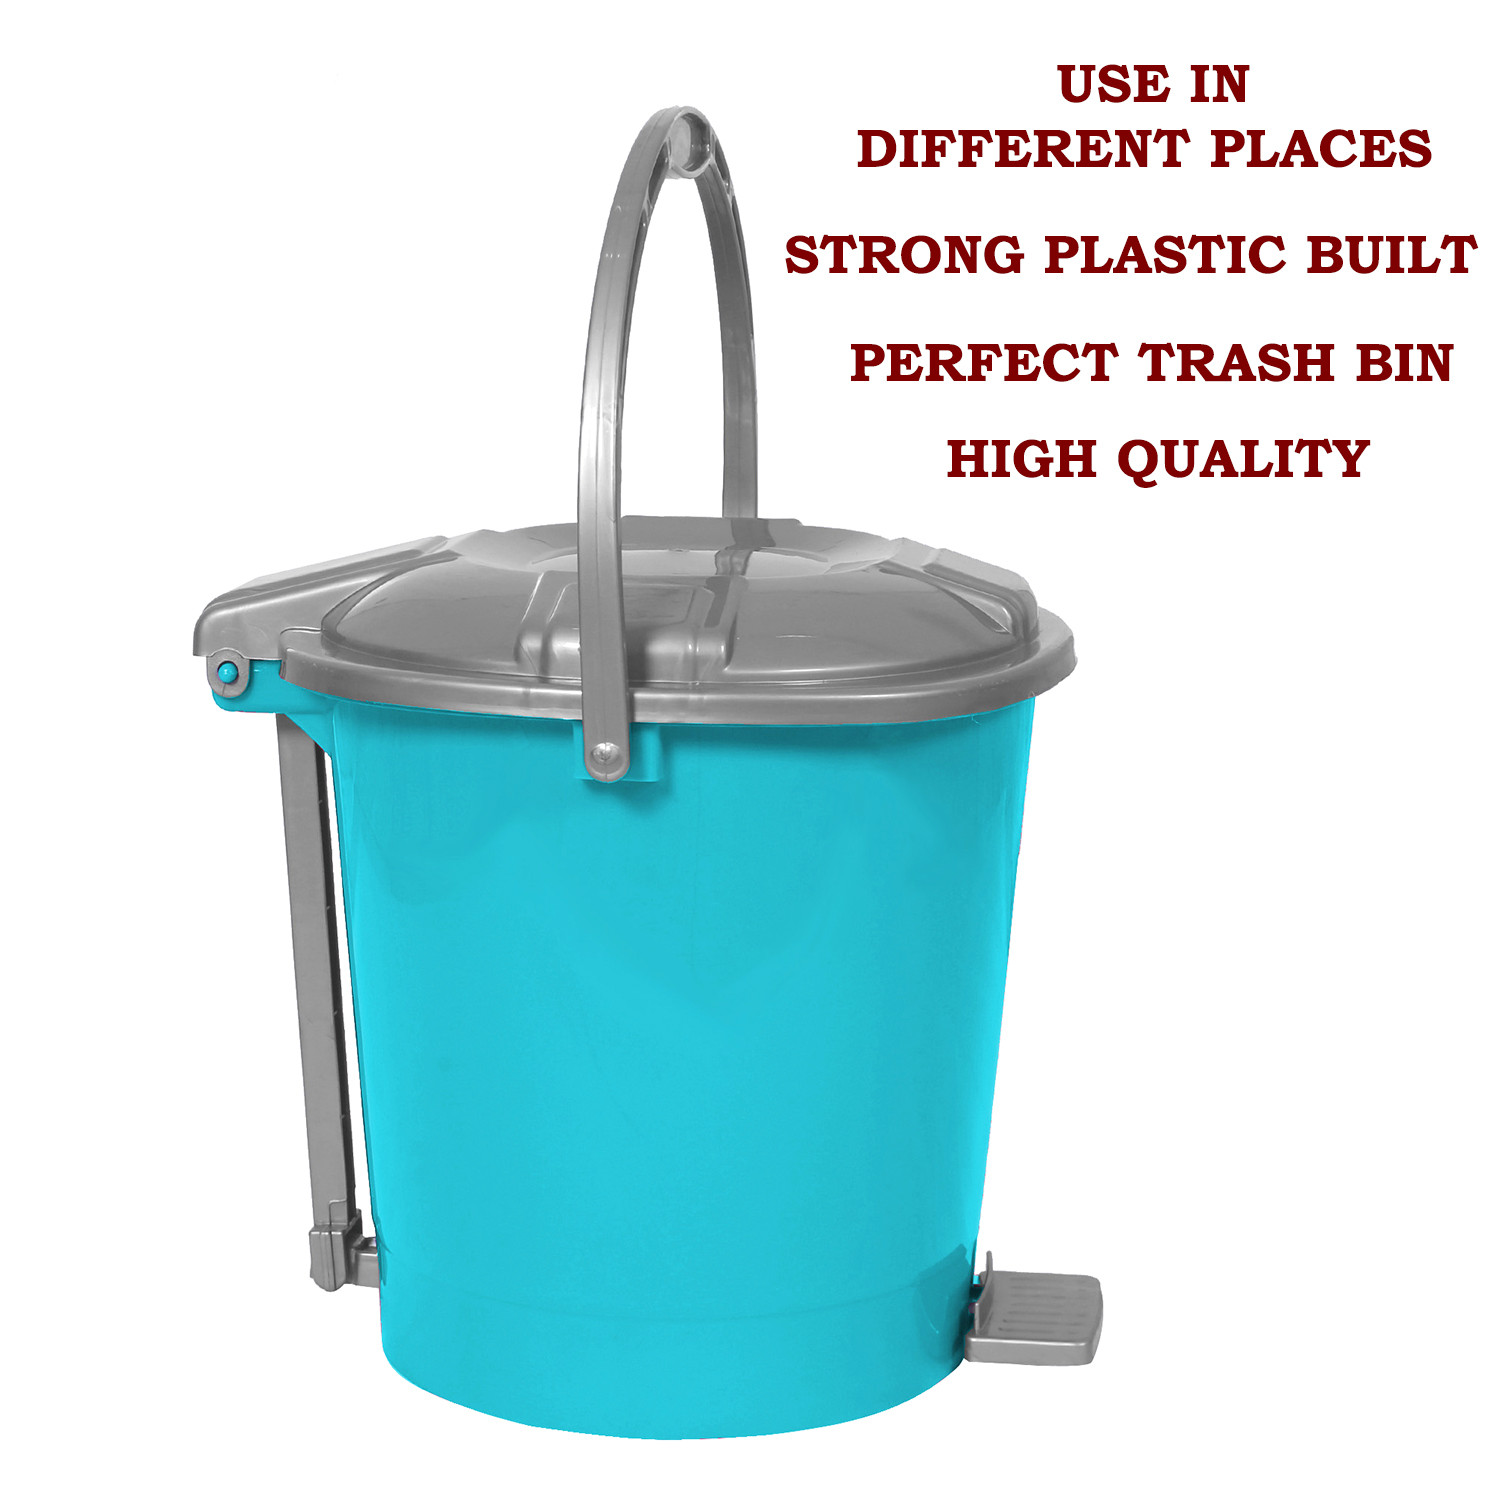 Kuber Industries Durable Plastic Pedal Dustbin|Waste Bin|Trash Can For Kitchen & Home With Handle,7 Litre,Pack of 2 (Sky Blue & Black)